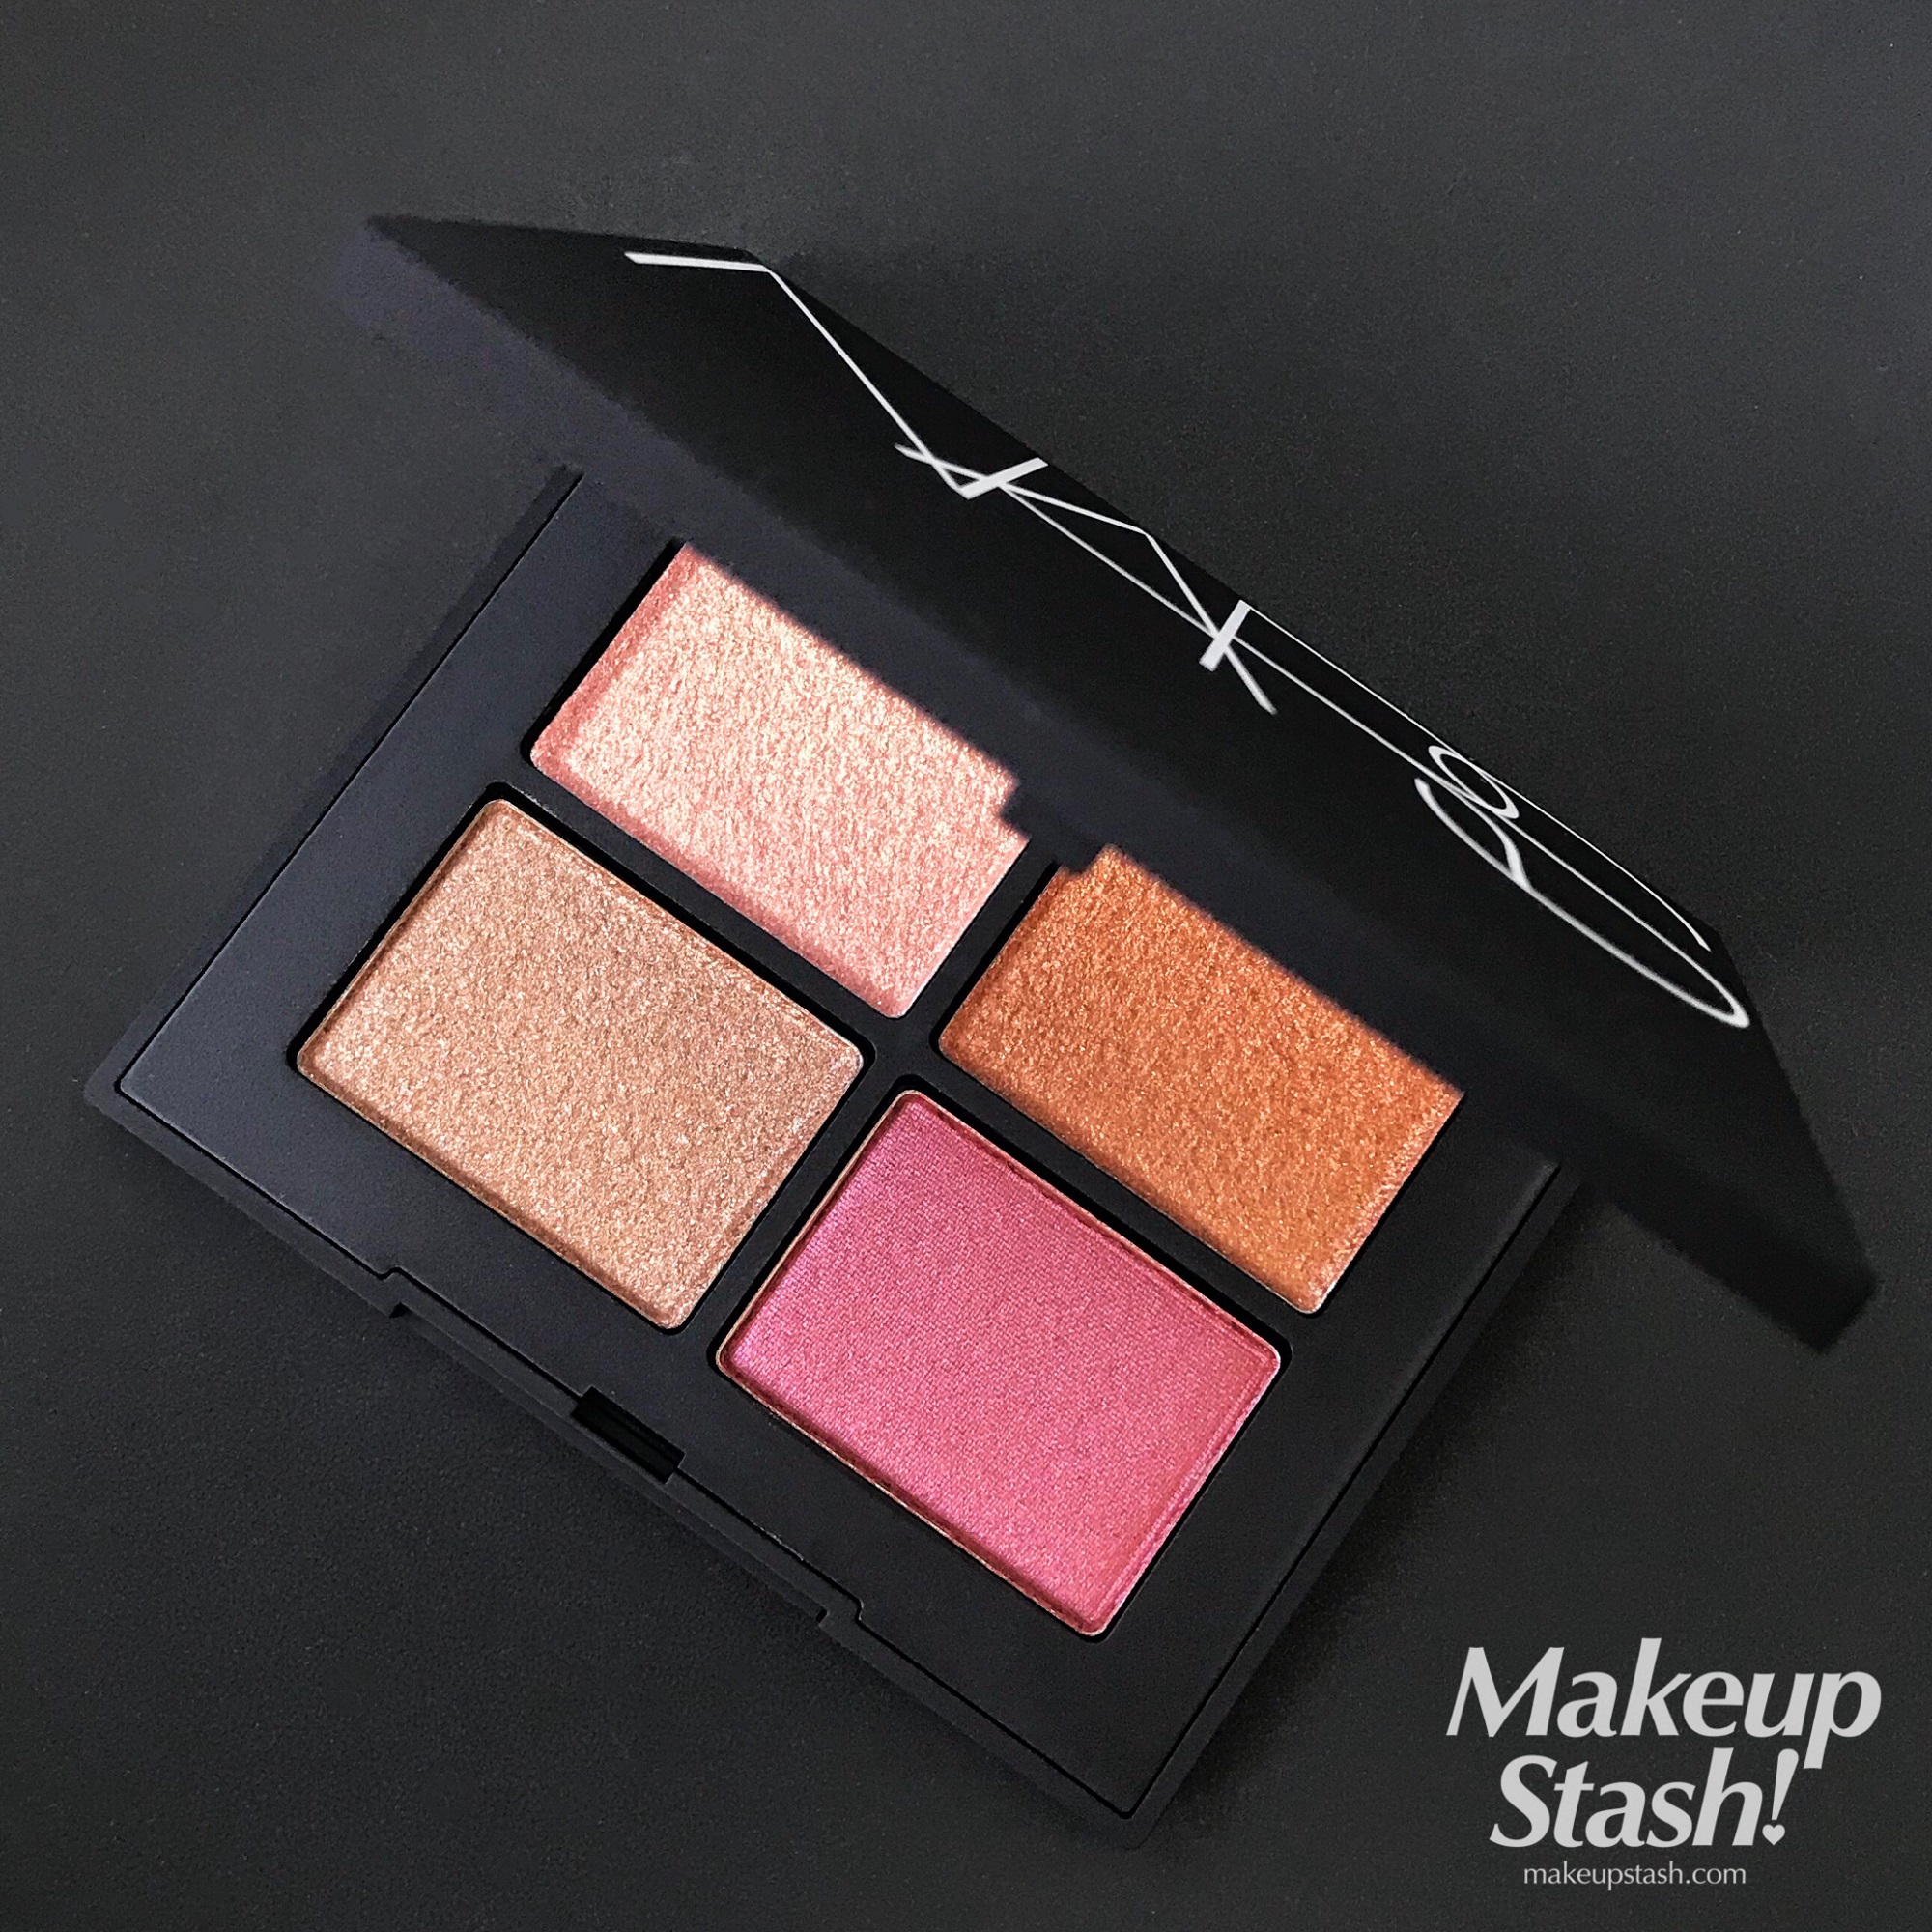 Review | NARS Quad Eyeshadow in Singapore